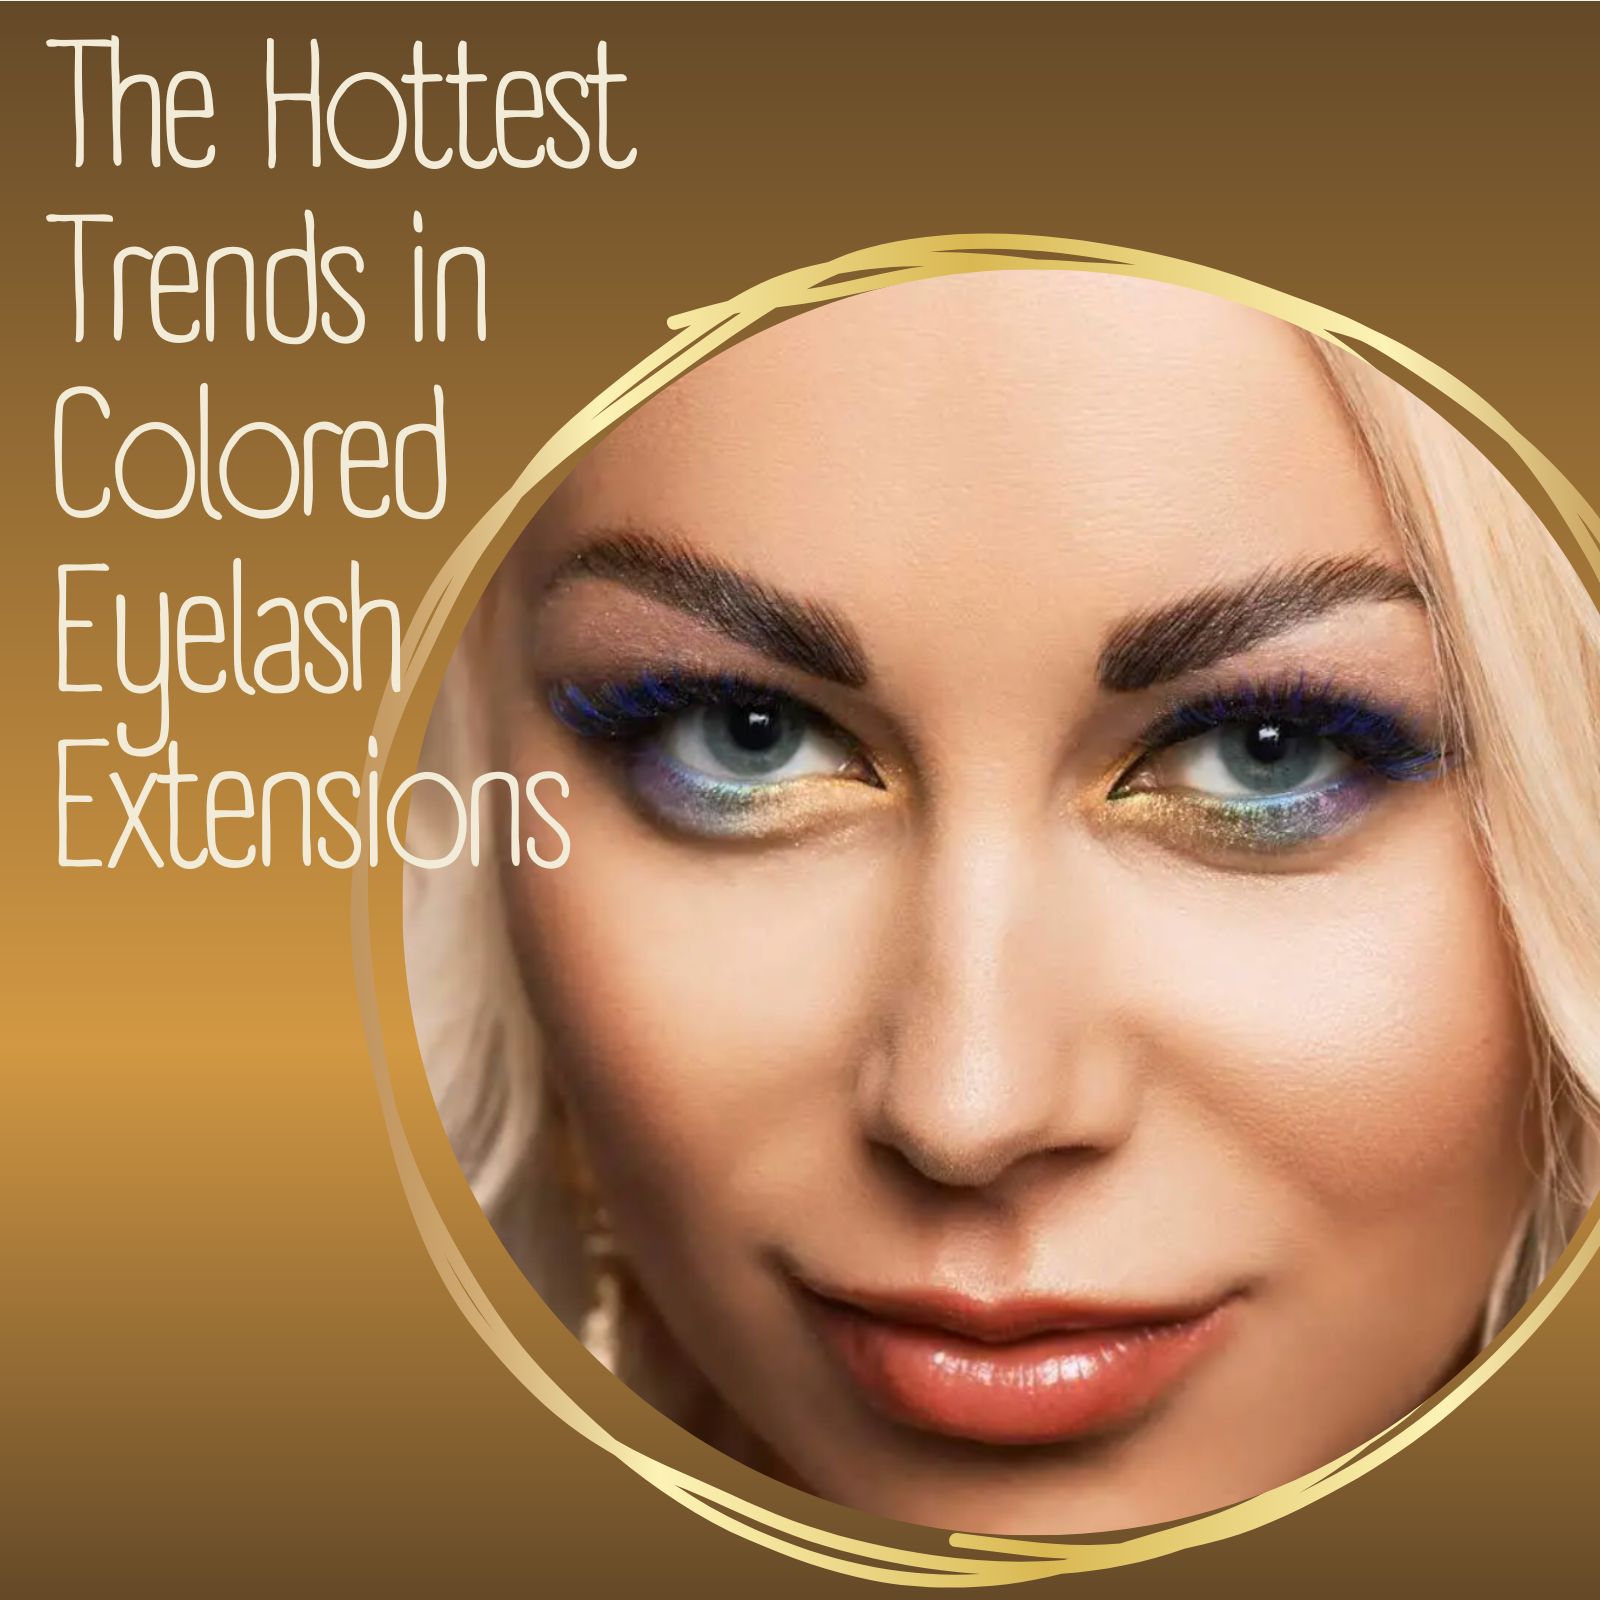 The Hottest Trends in Colored Eyelash Extensions